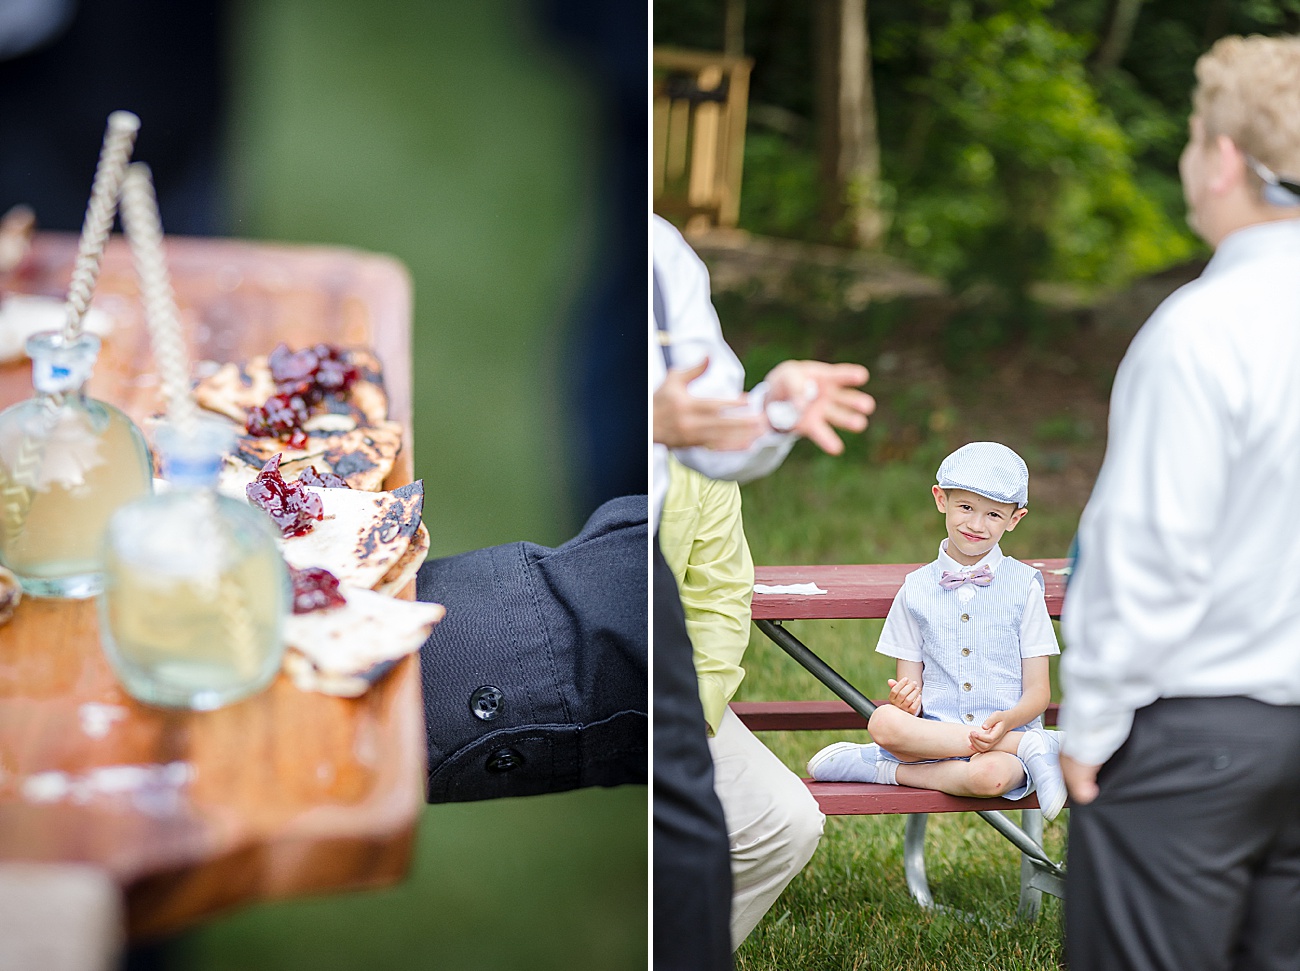 Cocktail hour appetizers at Parmelee Farm Wedding in Killingworth CT by Jamerlyn Brown Photography